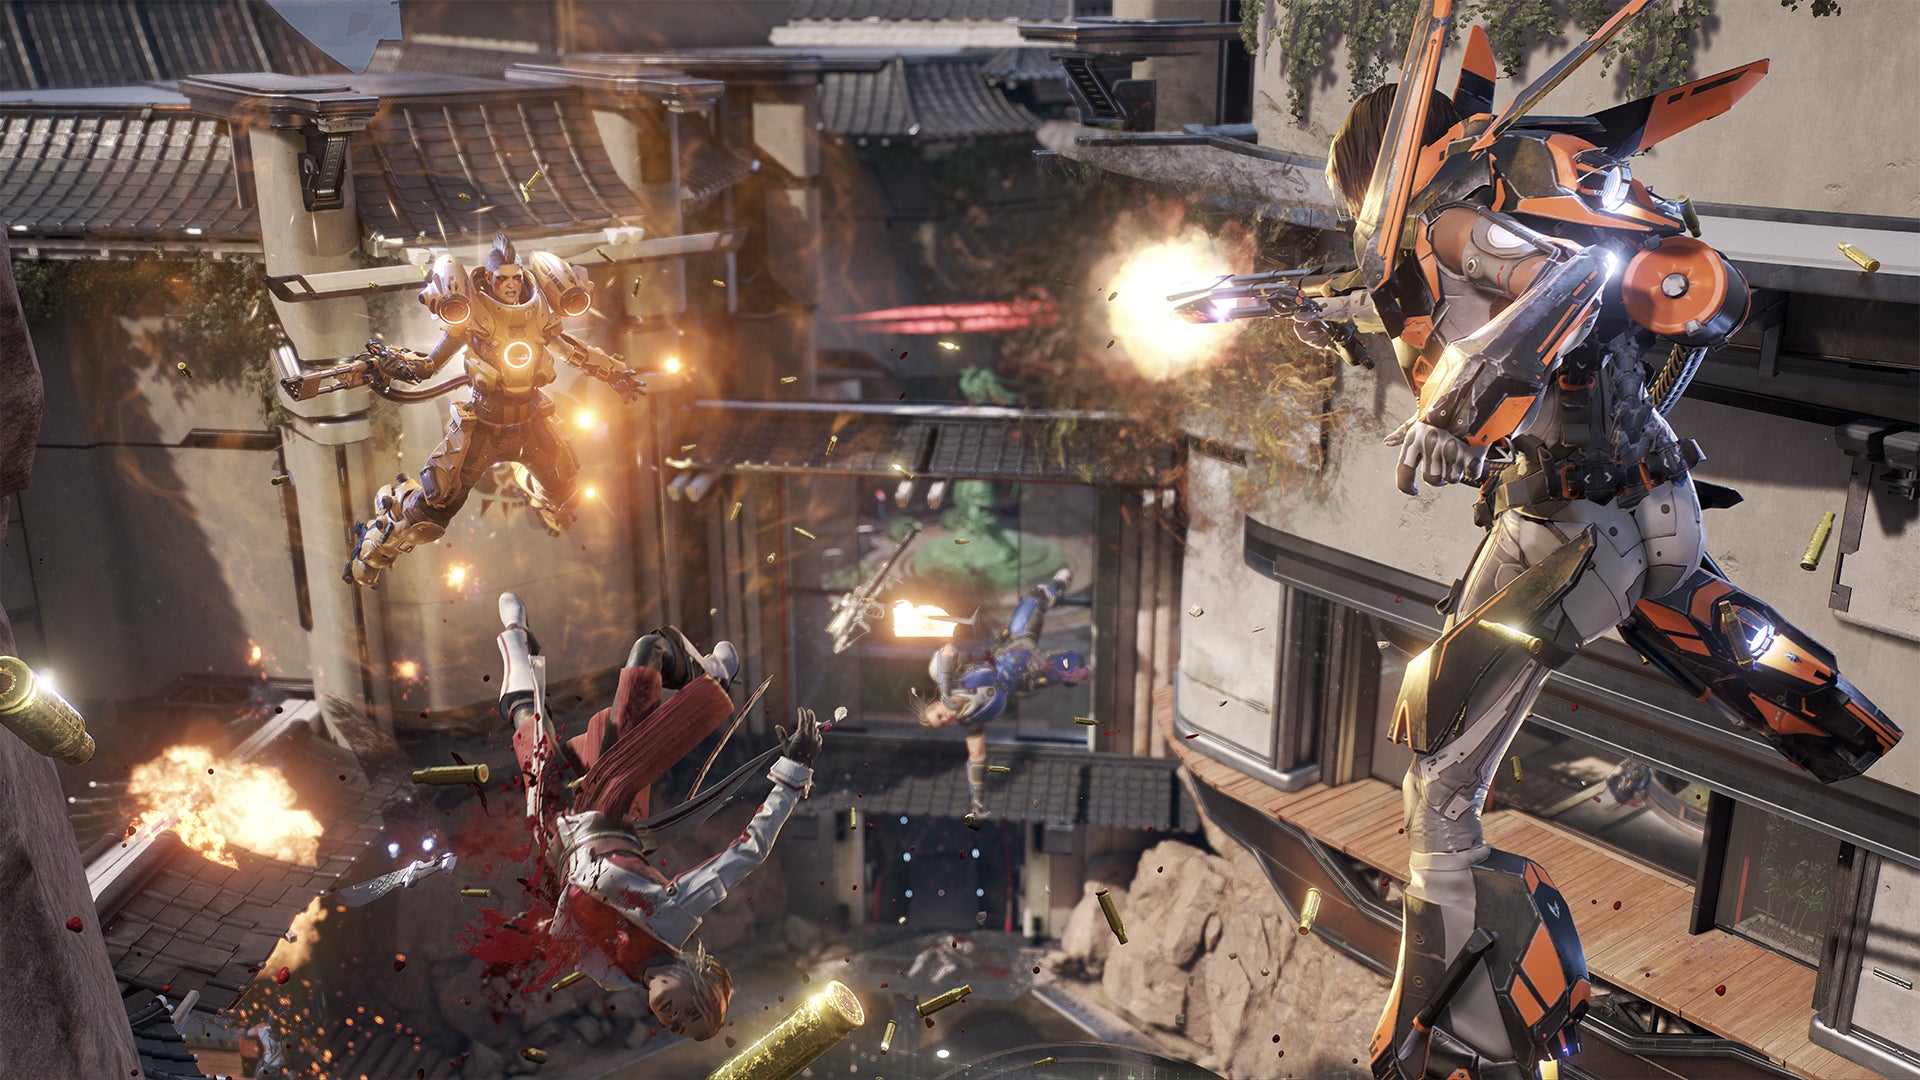 Image for LawBreakers failed because it was too "woke", says Cliff Bleszinski